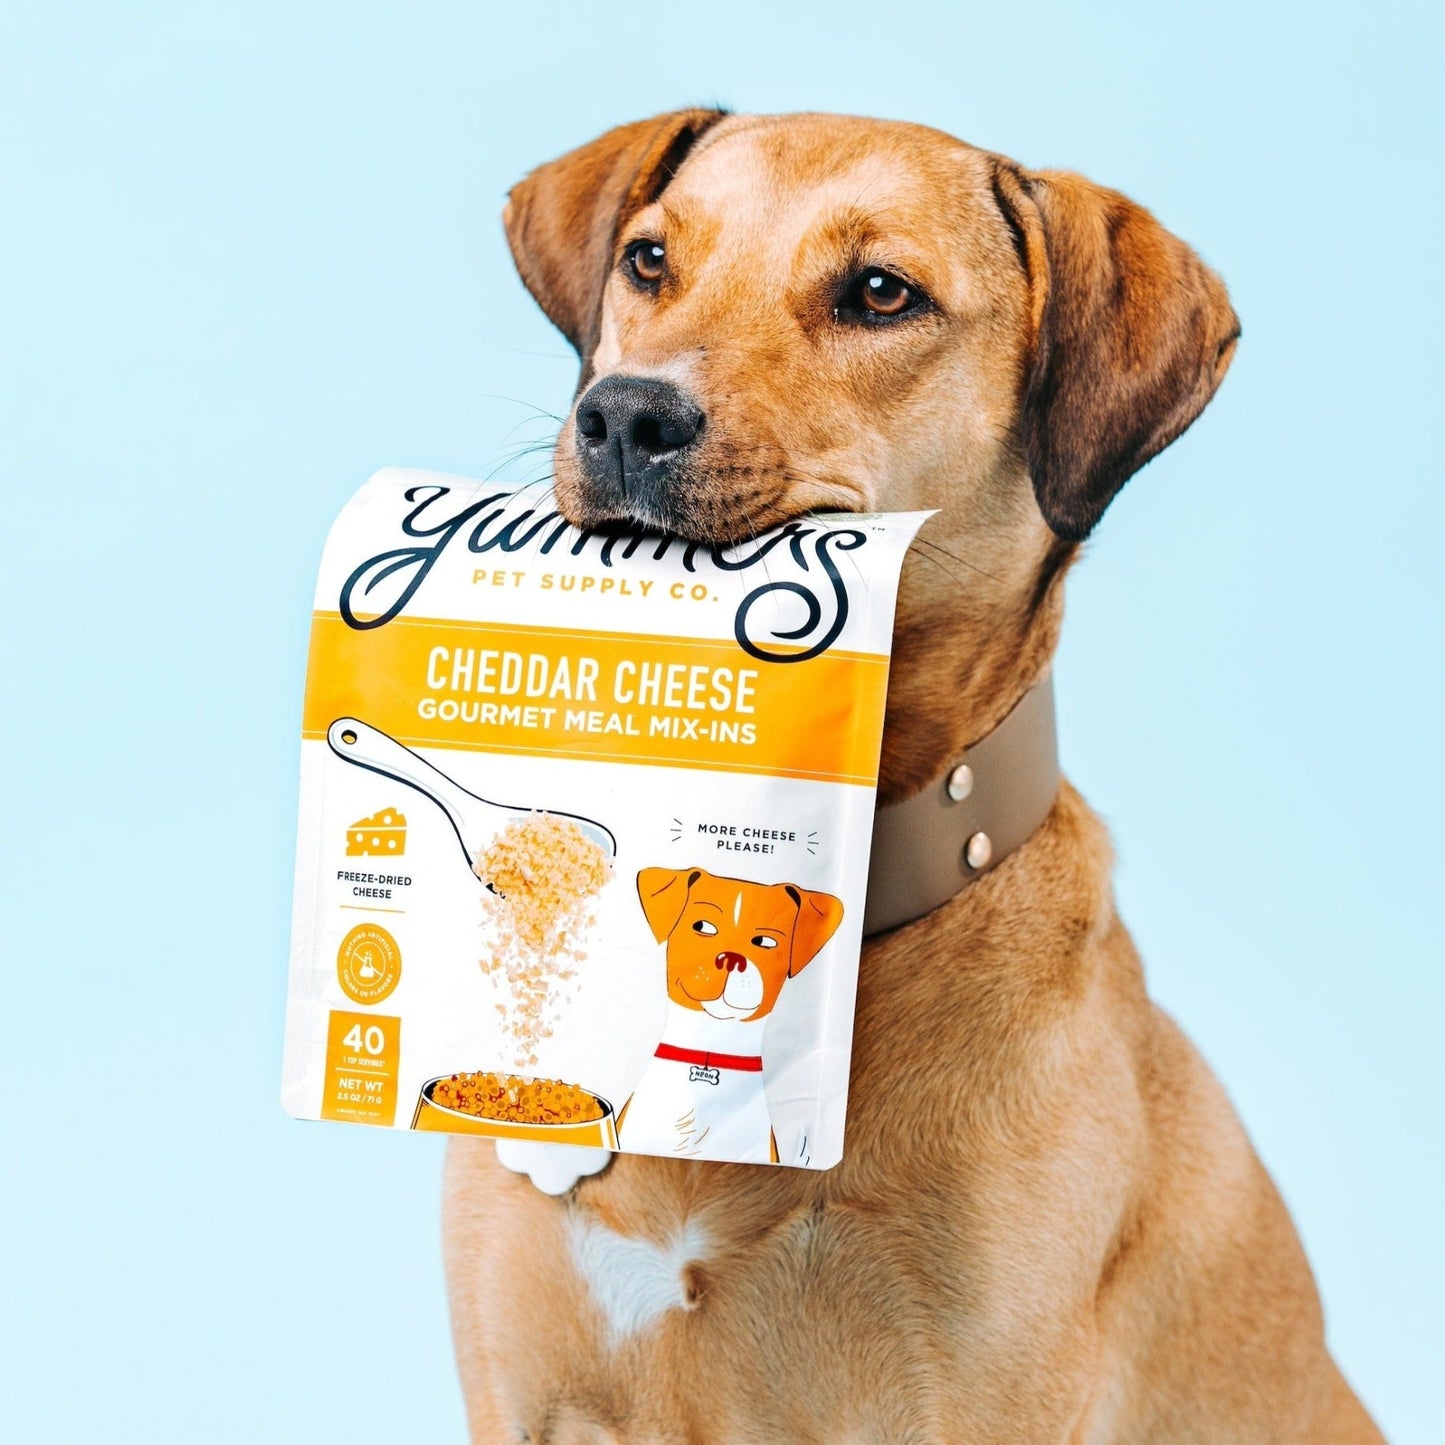 Freeze-dried Cheddar Cheese Gourmet Meal Mix-in for Dogs